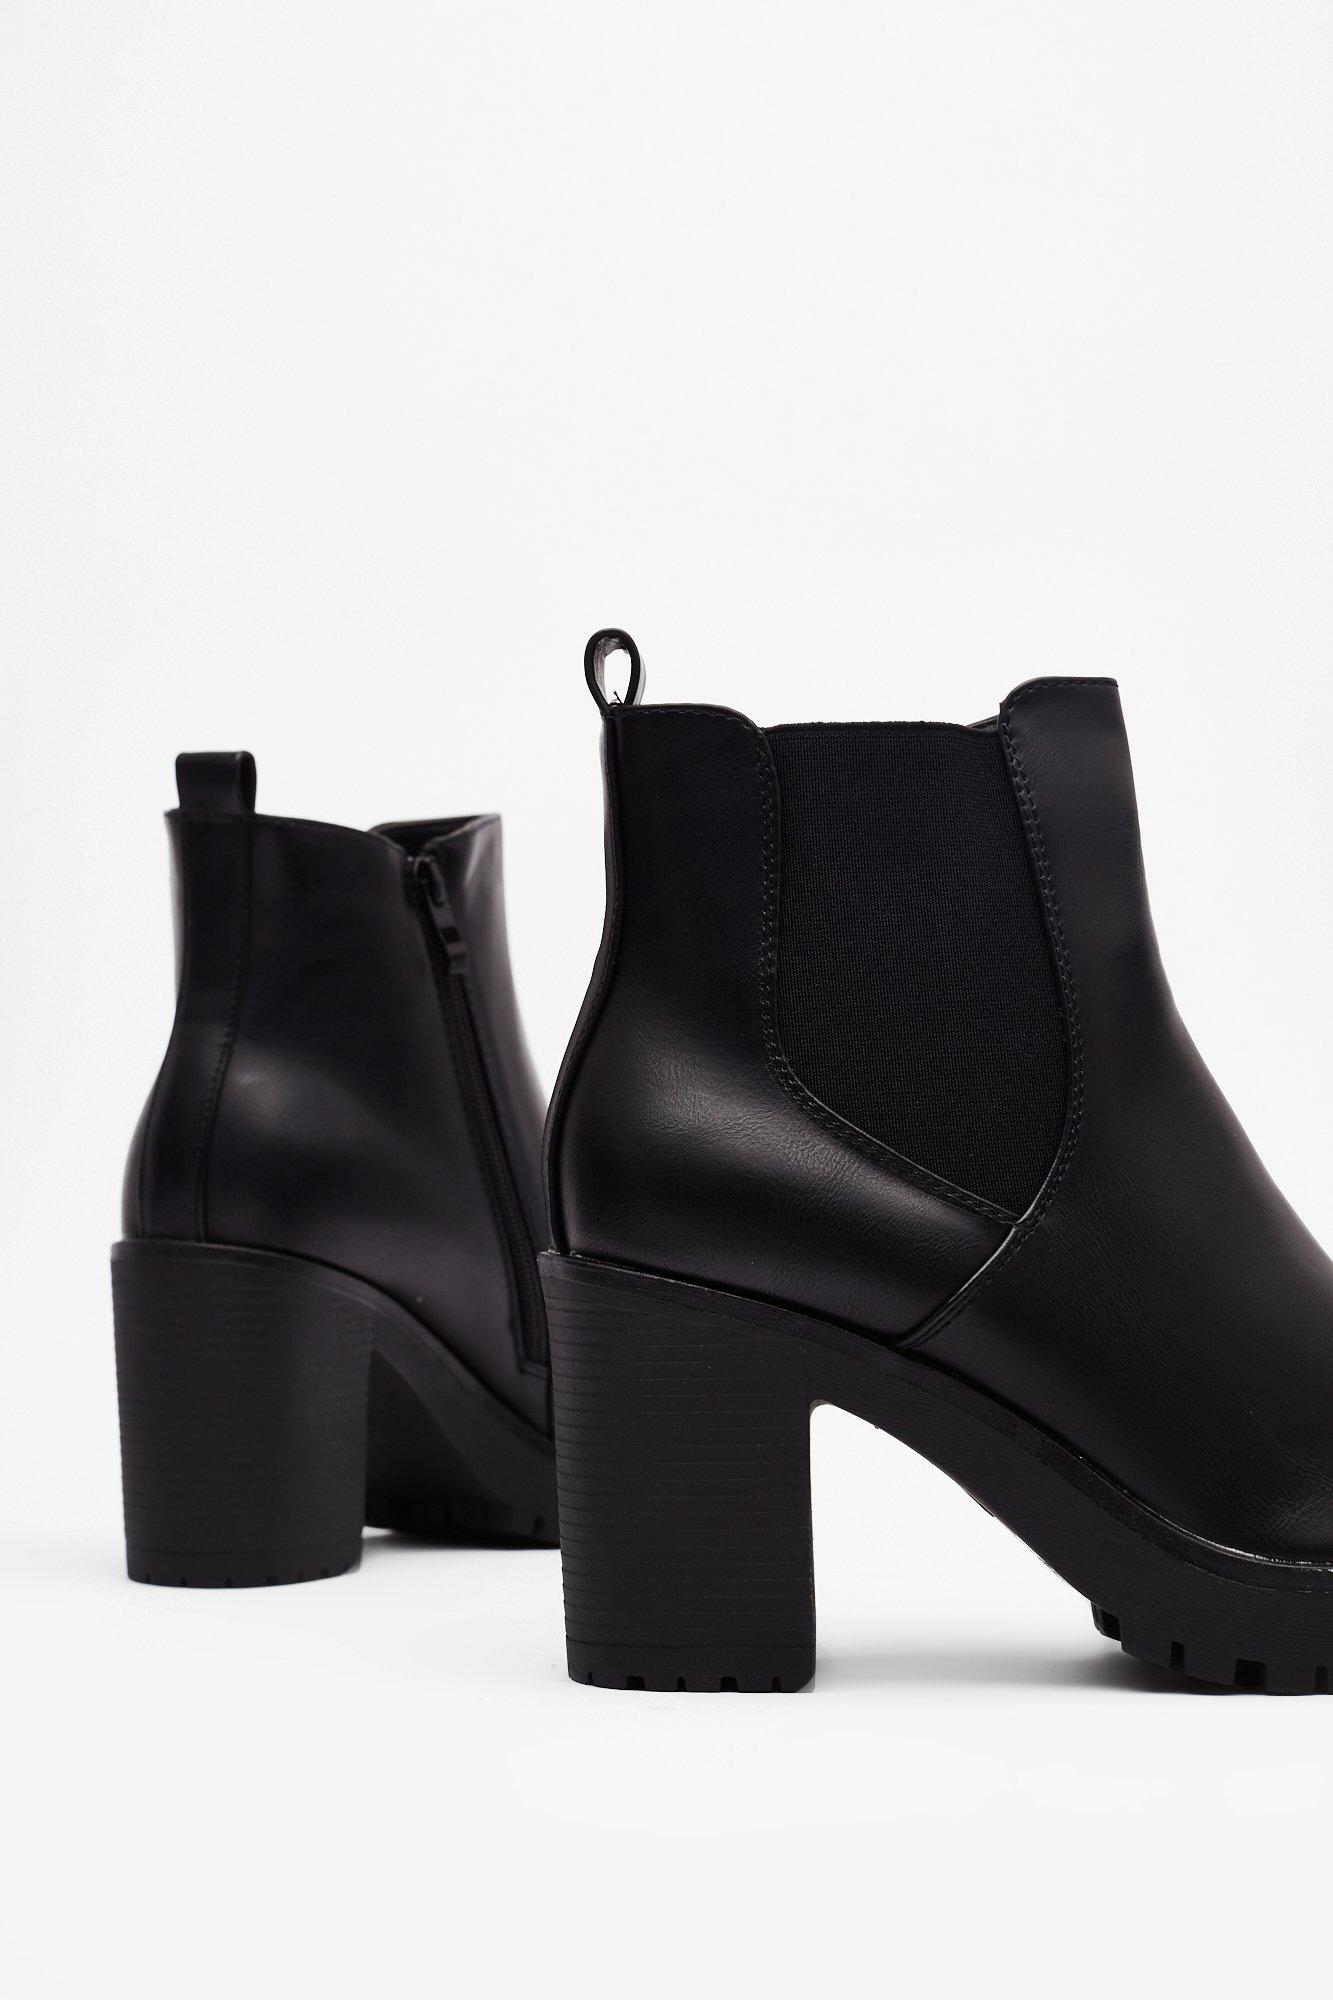 asda girls ankle boots